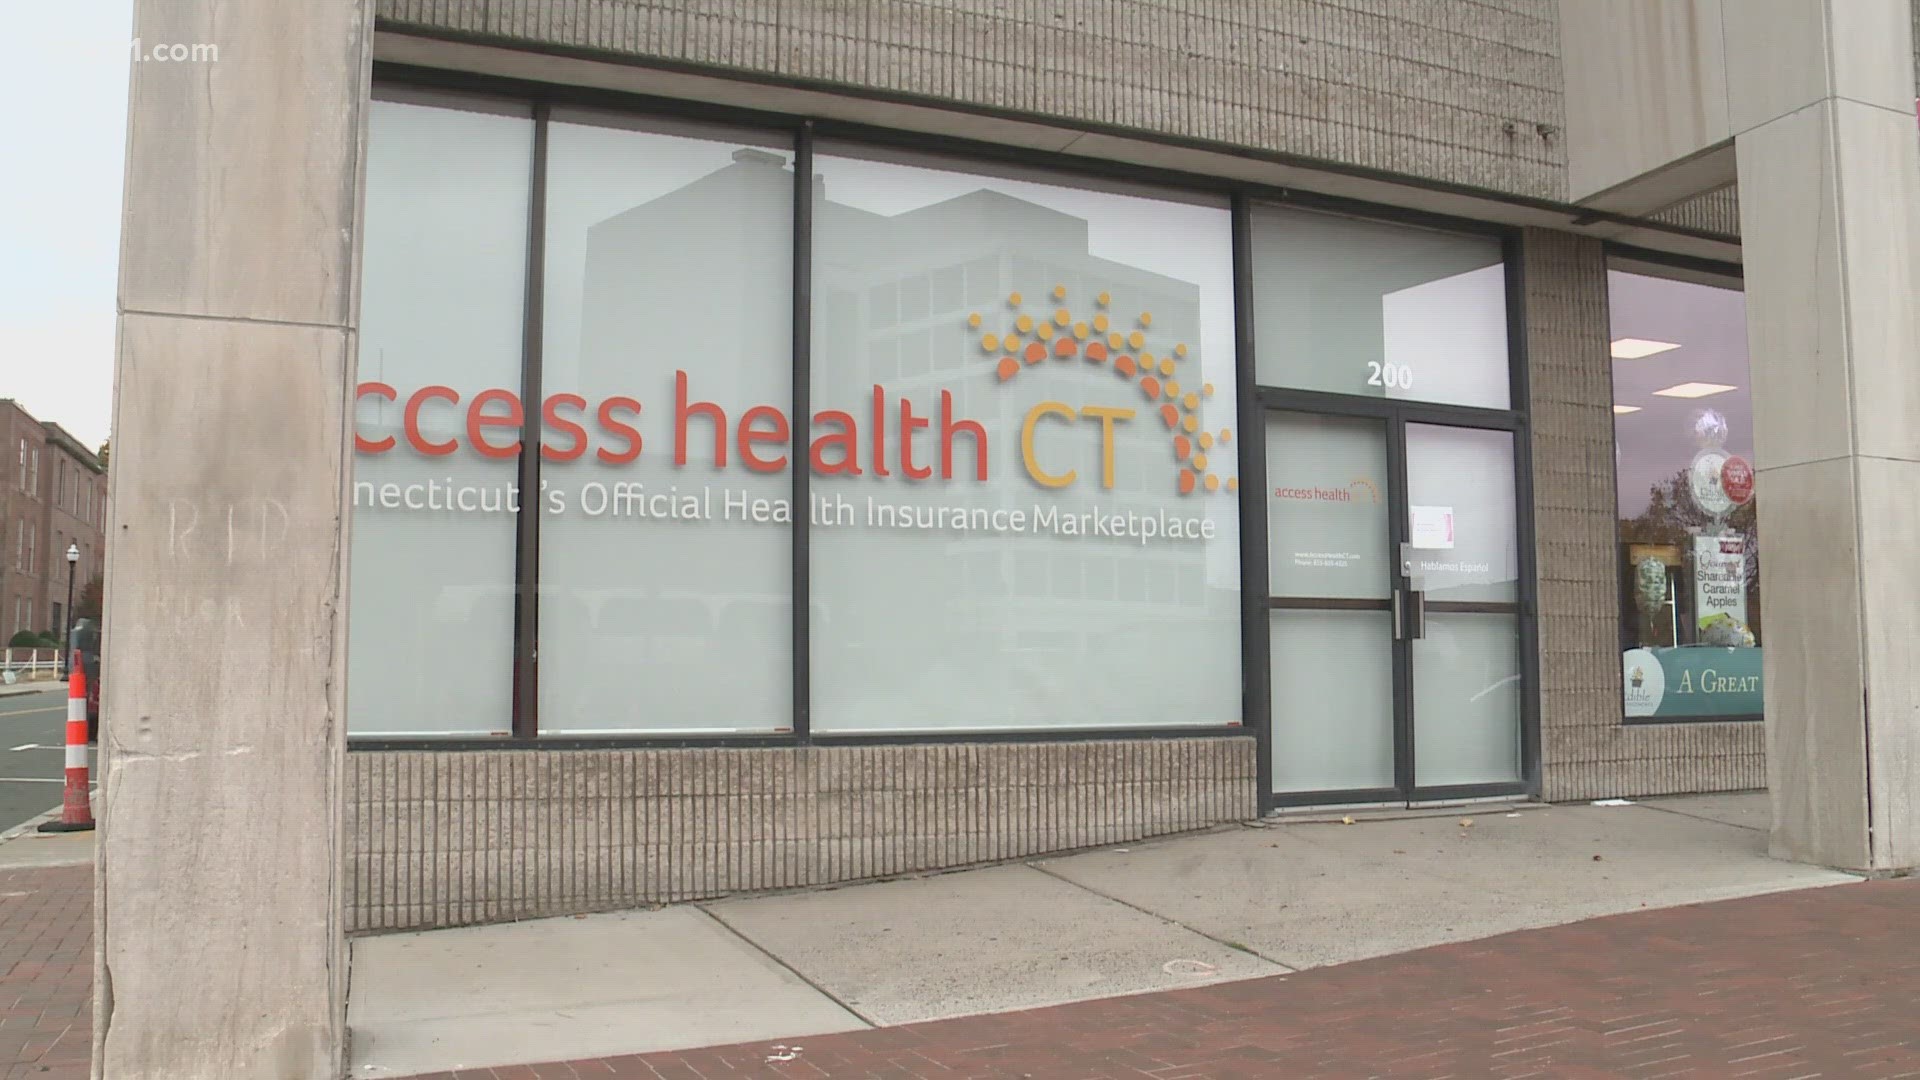 Over 20,000 more people signed up for Access Health CT this year than last year, making it the highest number of sign-ups since 2013.